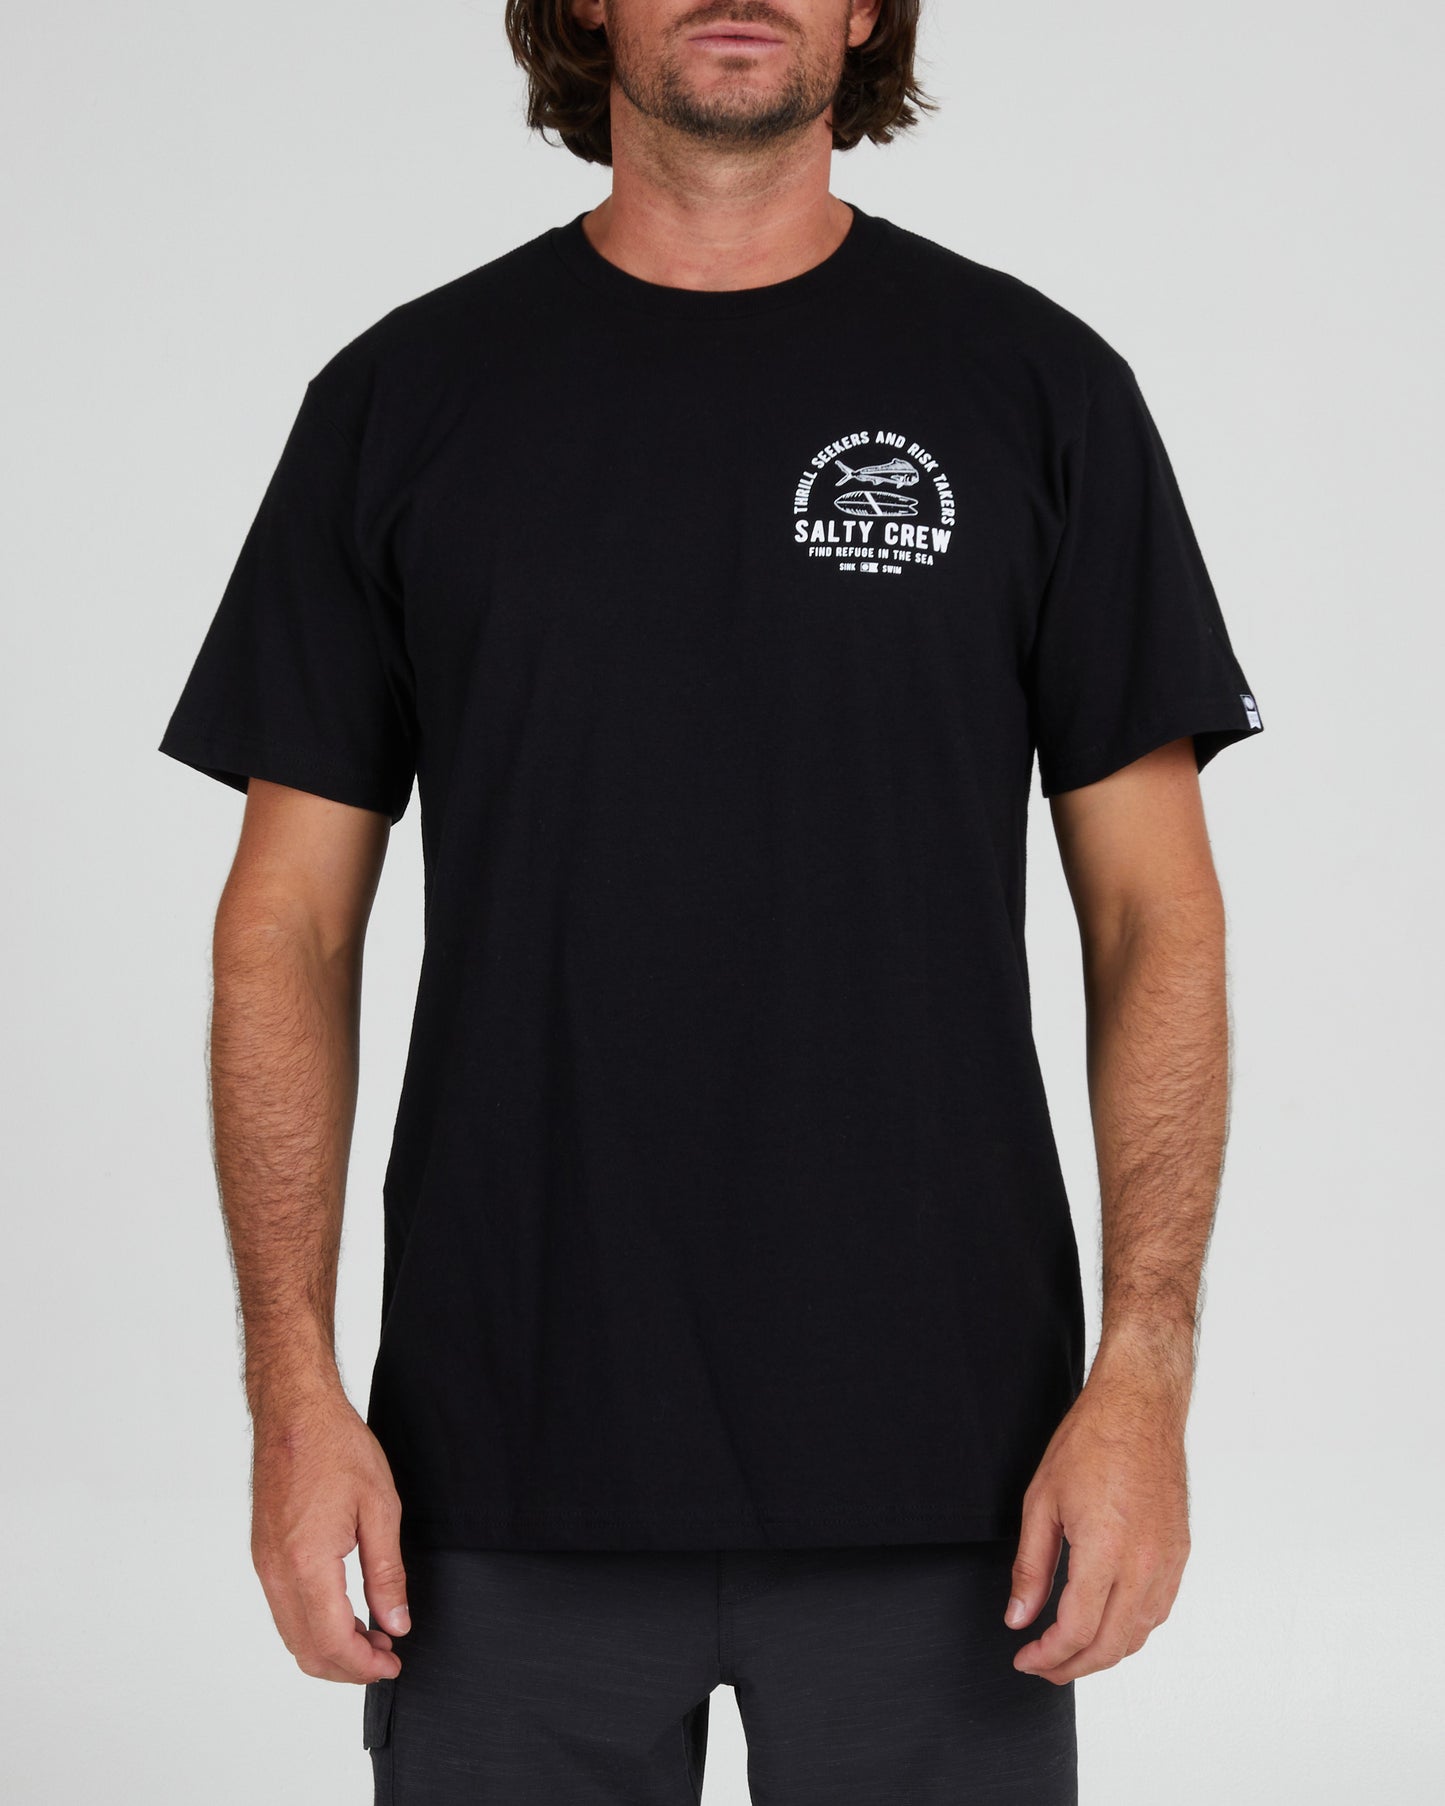 On body front of the Lateral Line Black S/S Standard Tee